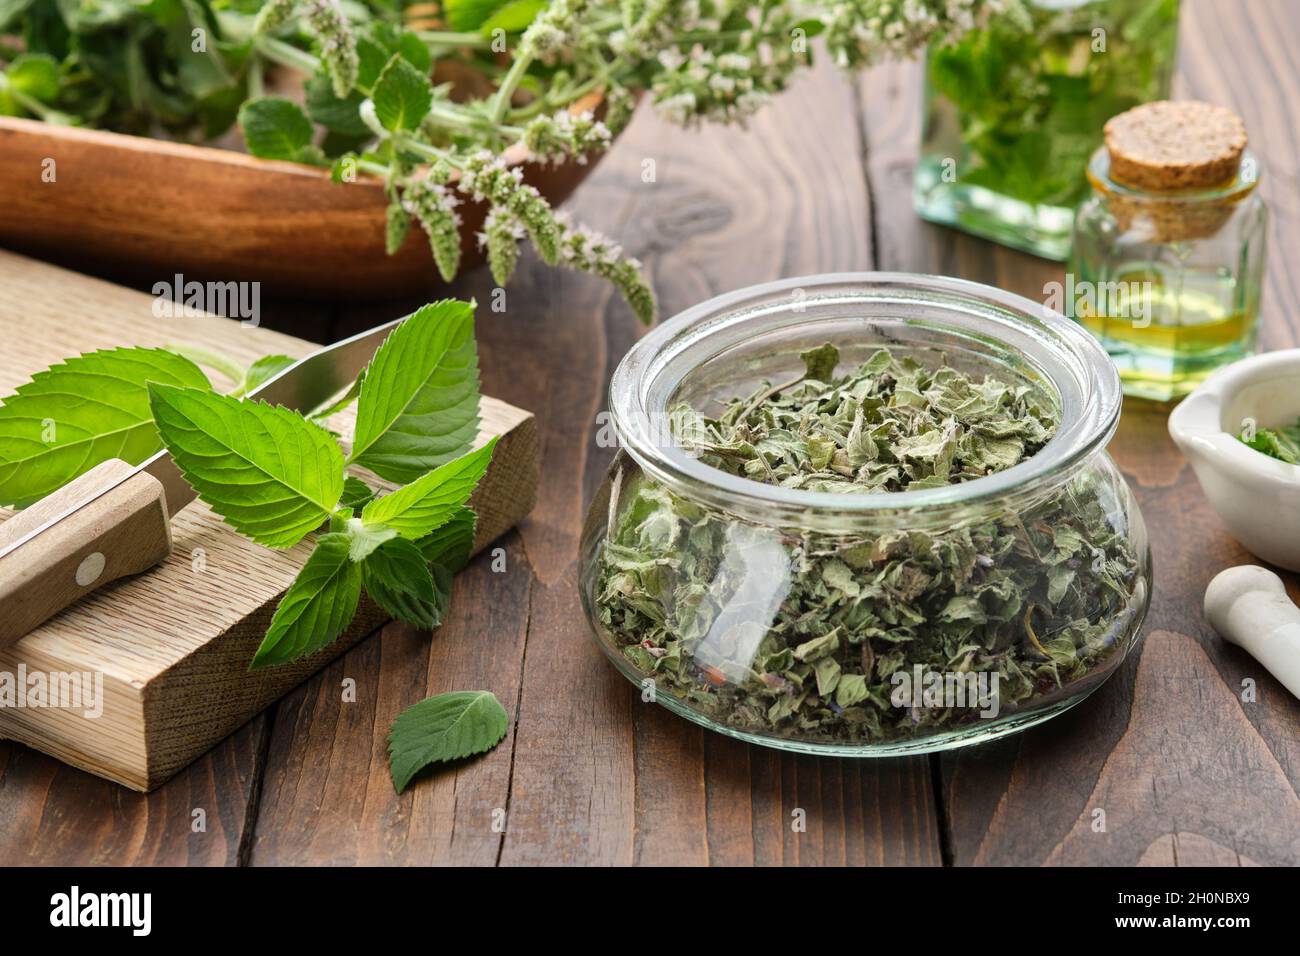 Jar of dried mint leaves. Fresh peppermint leaves on a cutting board. Blossom Mentha piperita medicinal plants, bottles of mint essential oil and infu Stock Photo